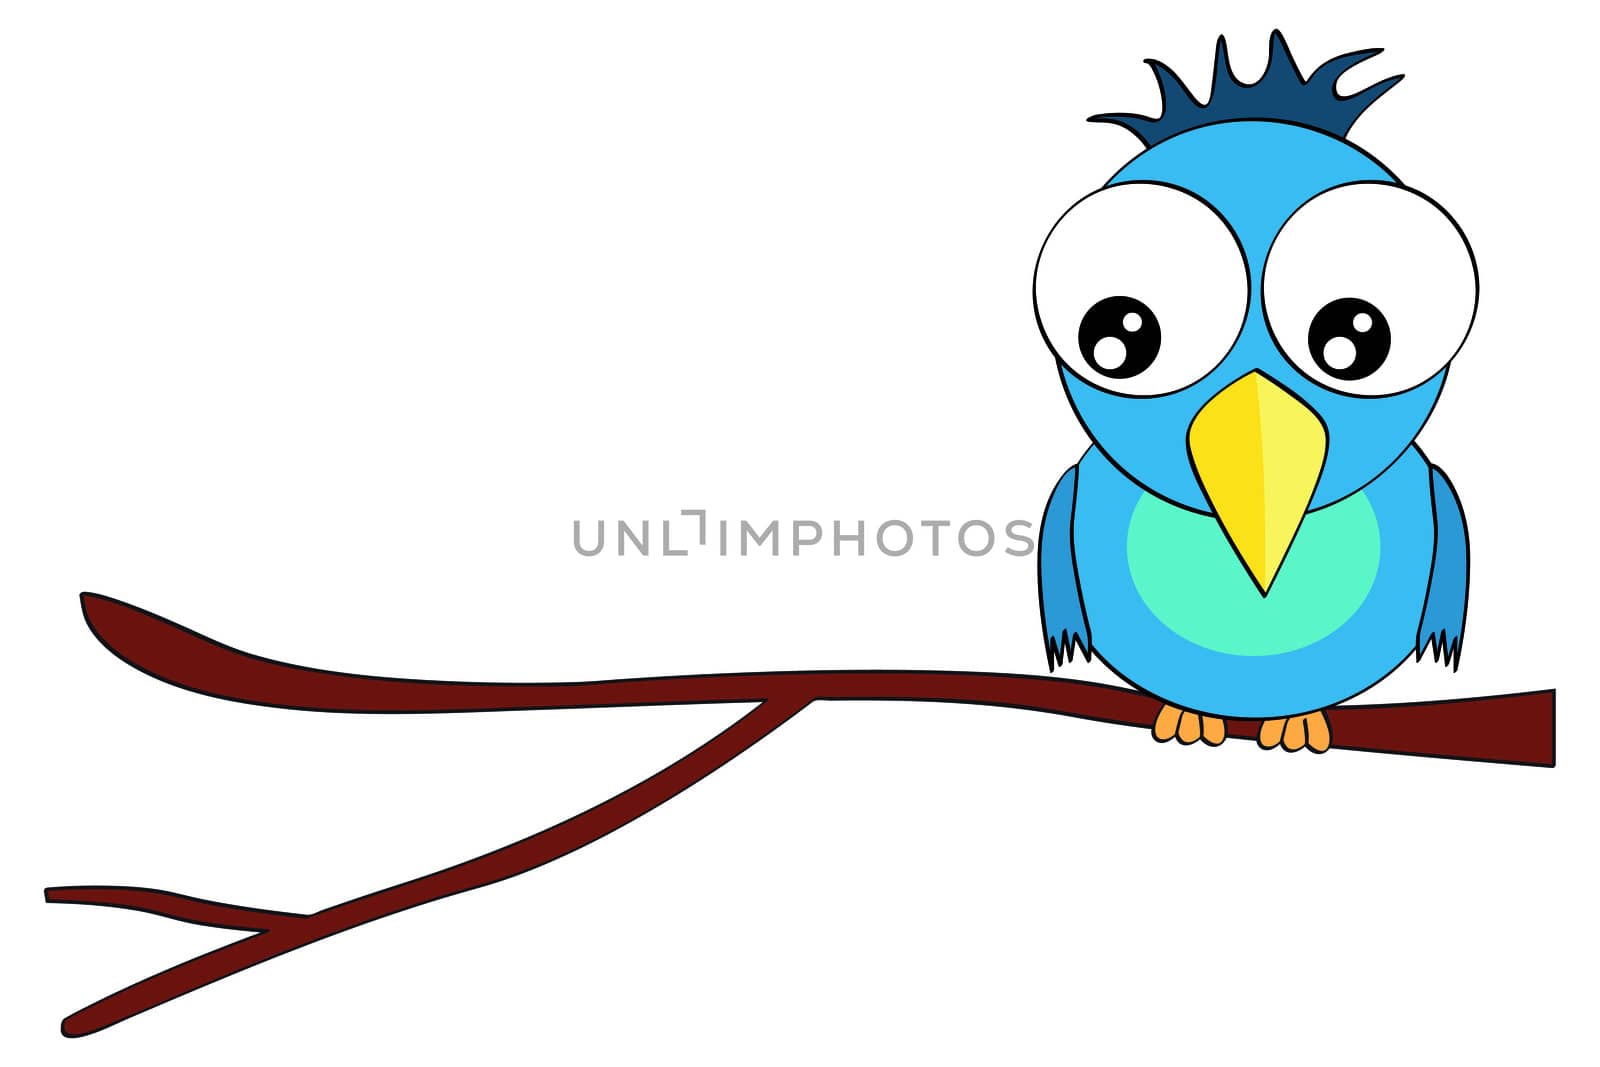 Cartoon smiling bird character on branch illustration isolated on white background by vermicule